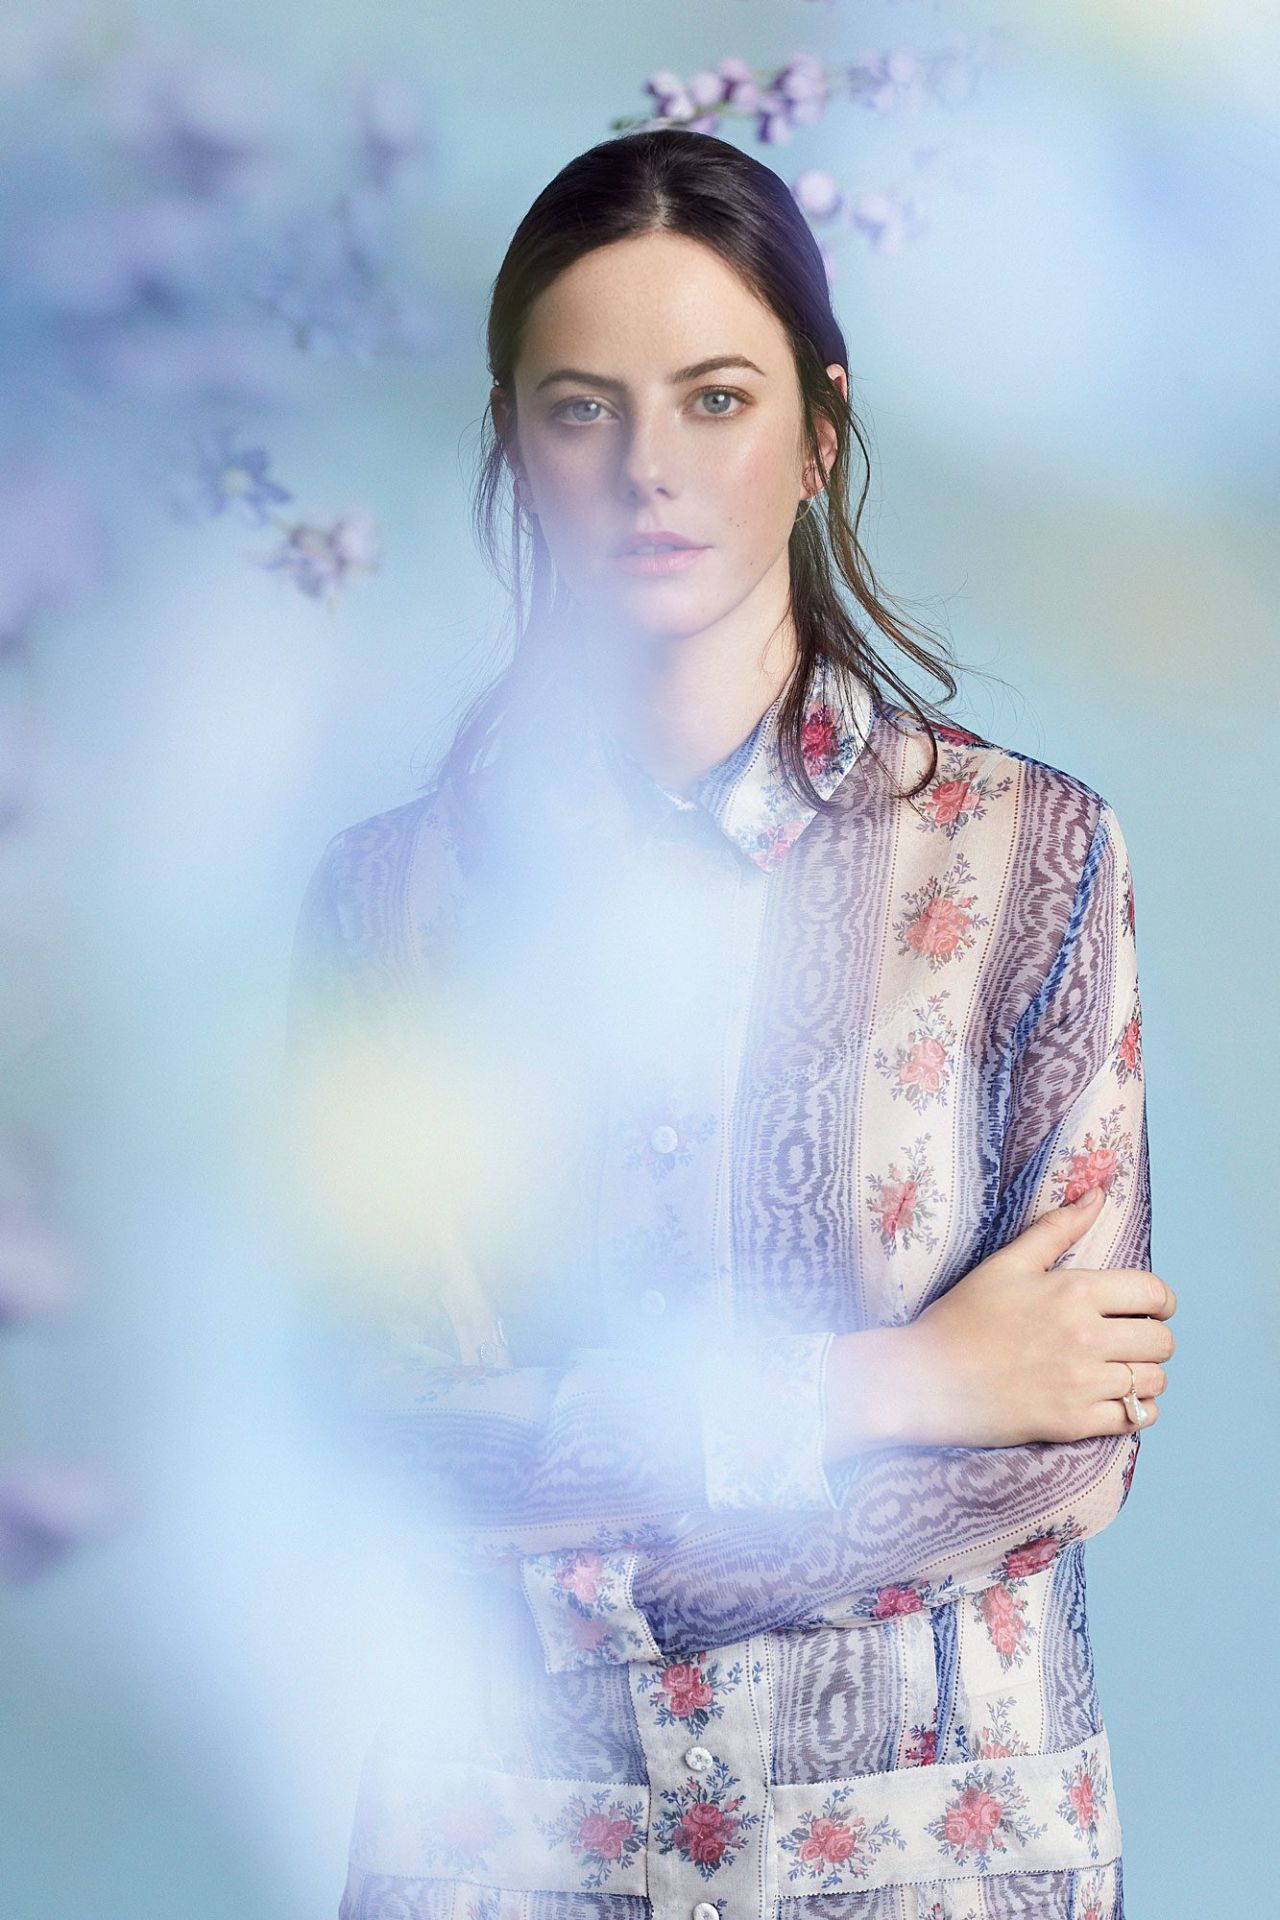 Kaya Scodelario - Photoshoot for Marie Claire UK March 20181280 x 1920